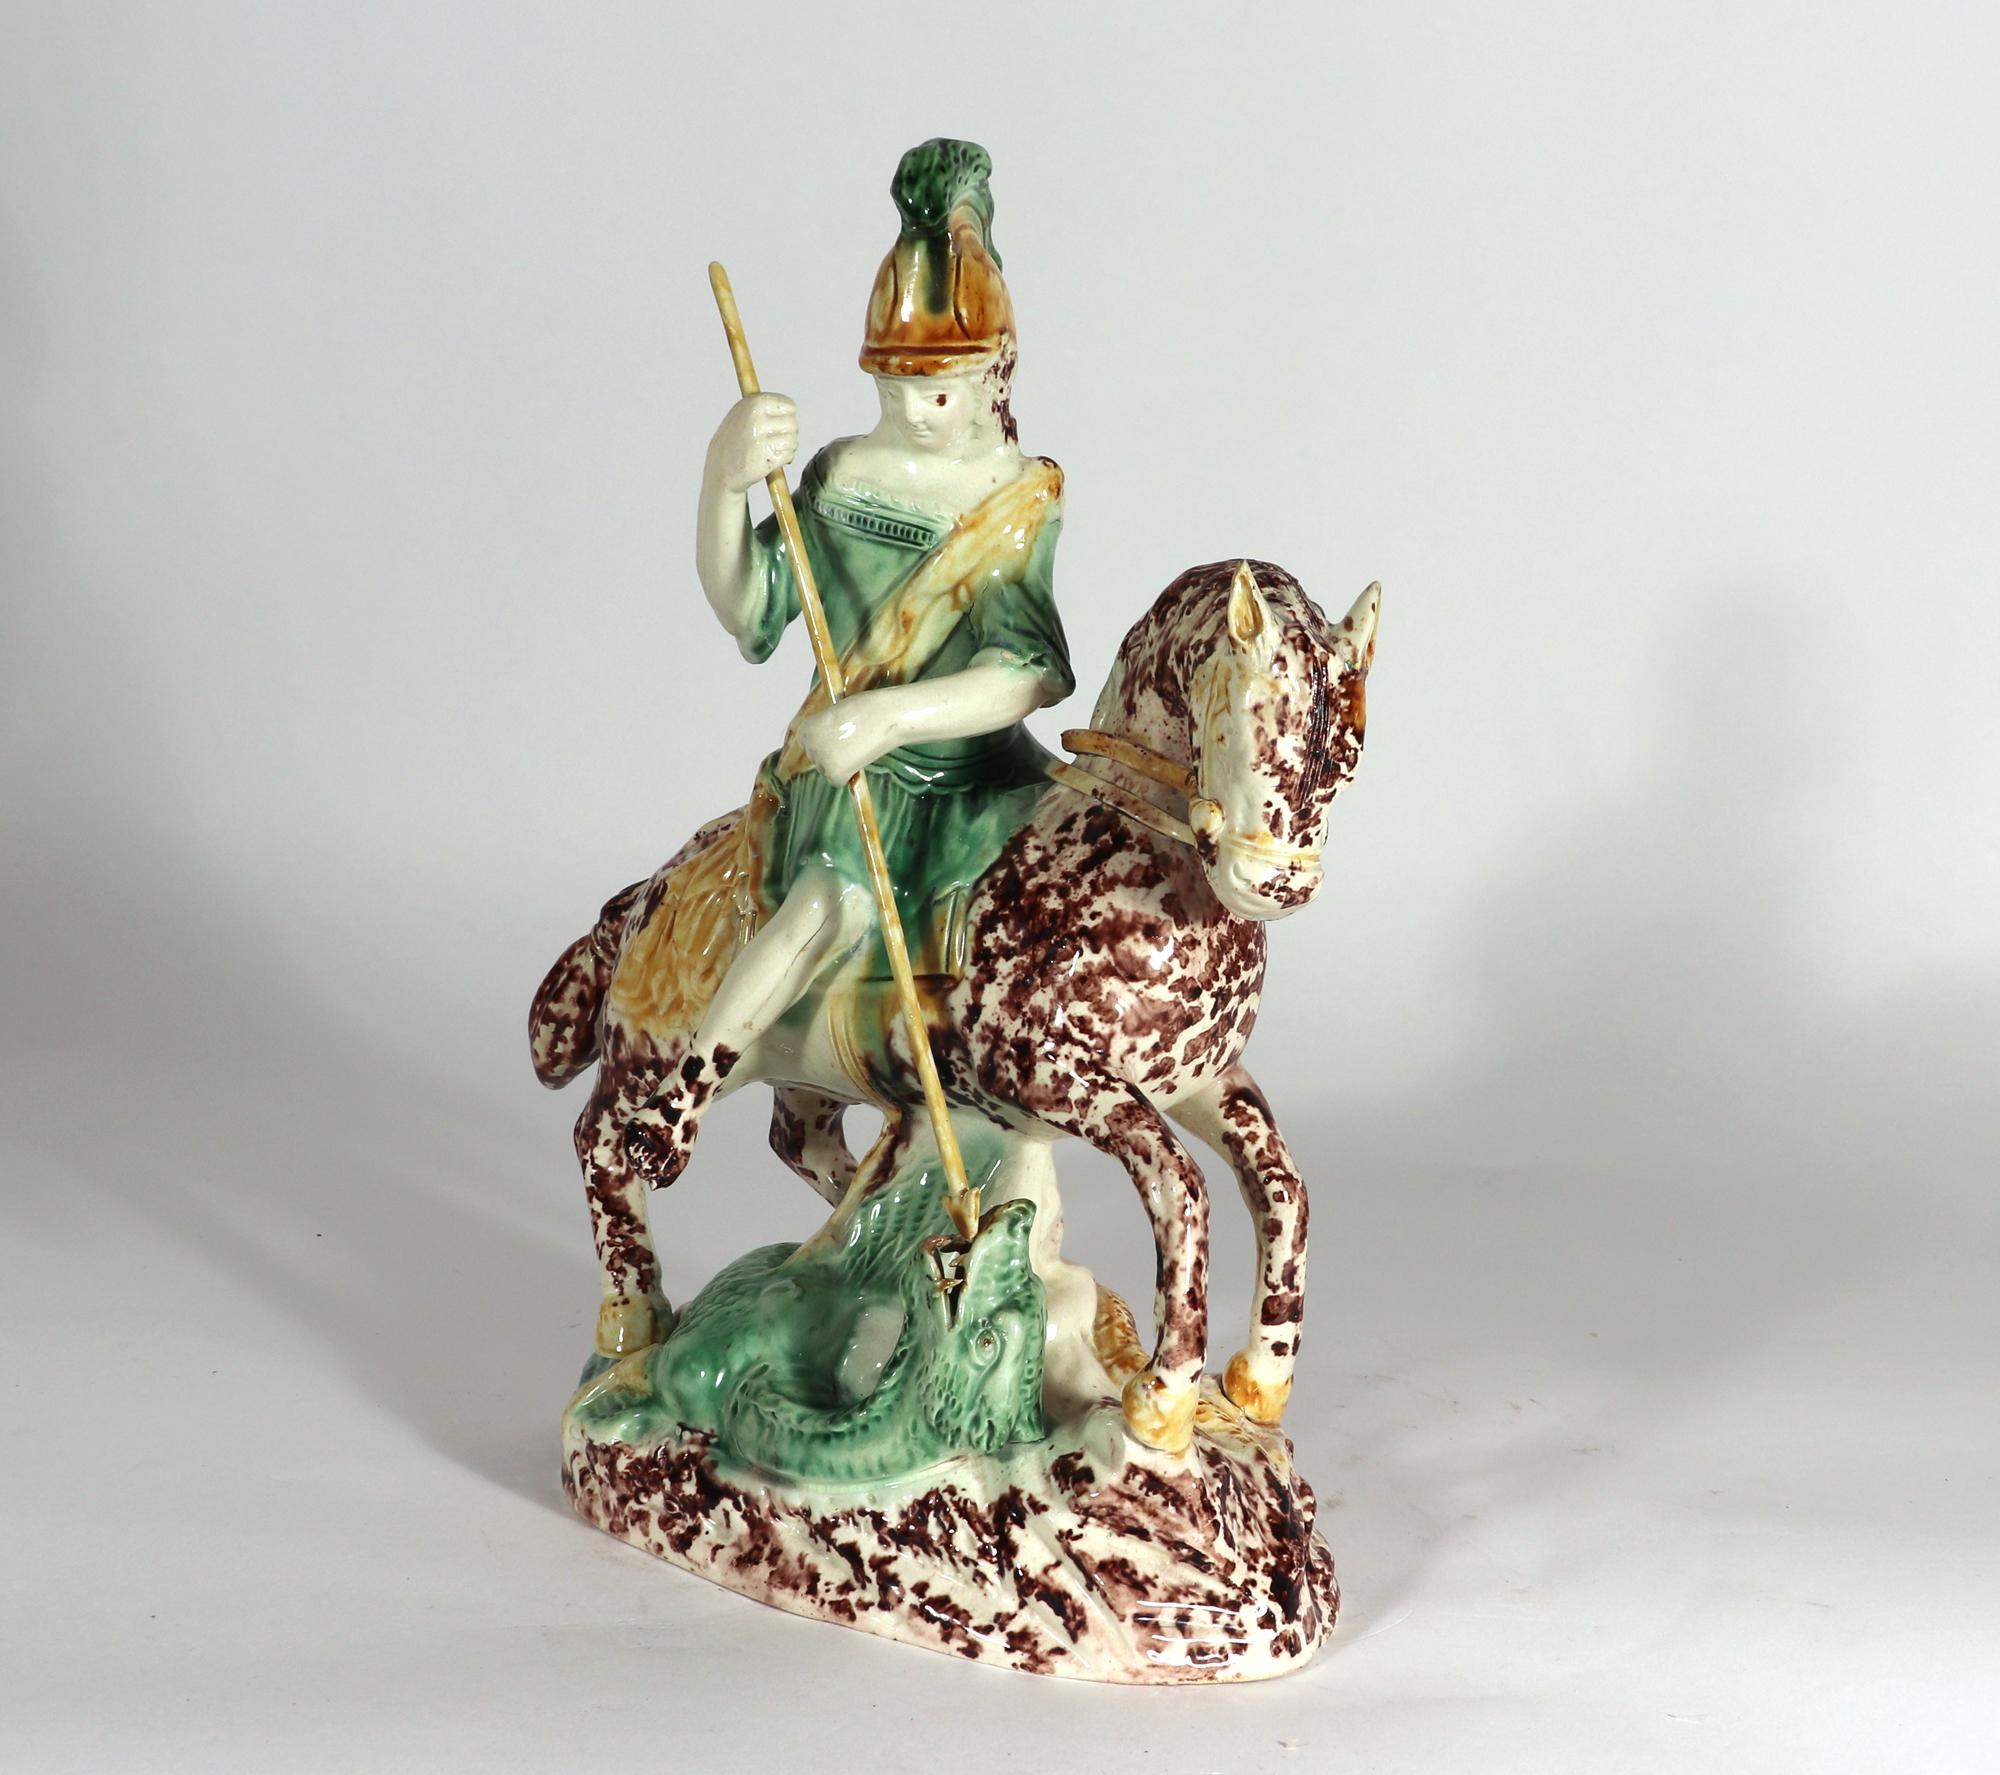 English Pottery Lead-glazed Earthenware Figure of St. George and the Dragon 5